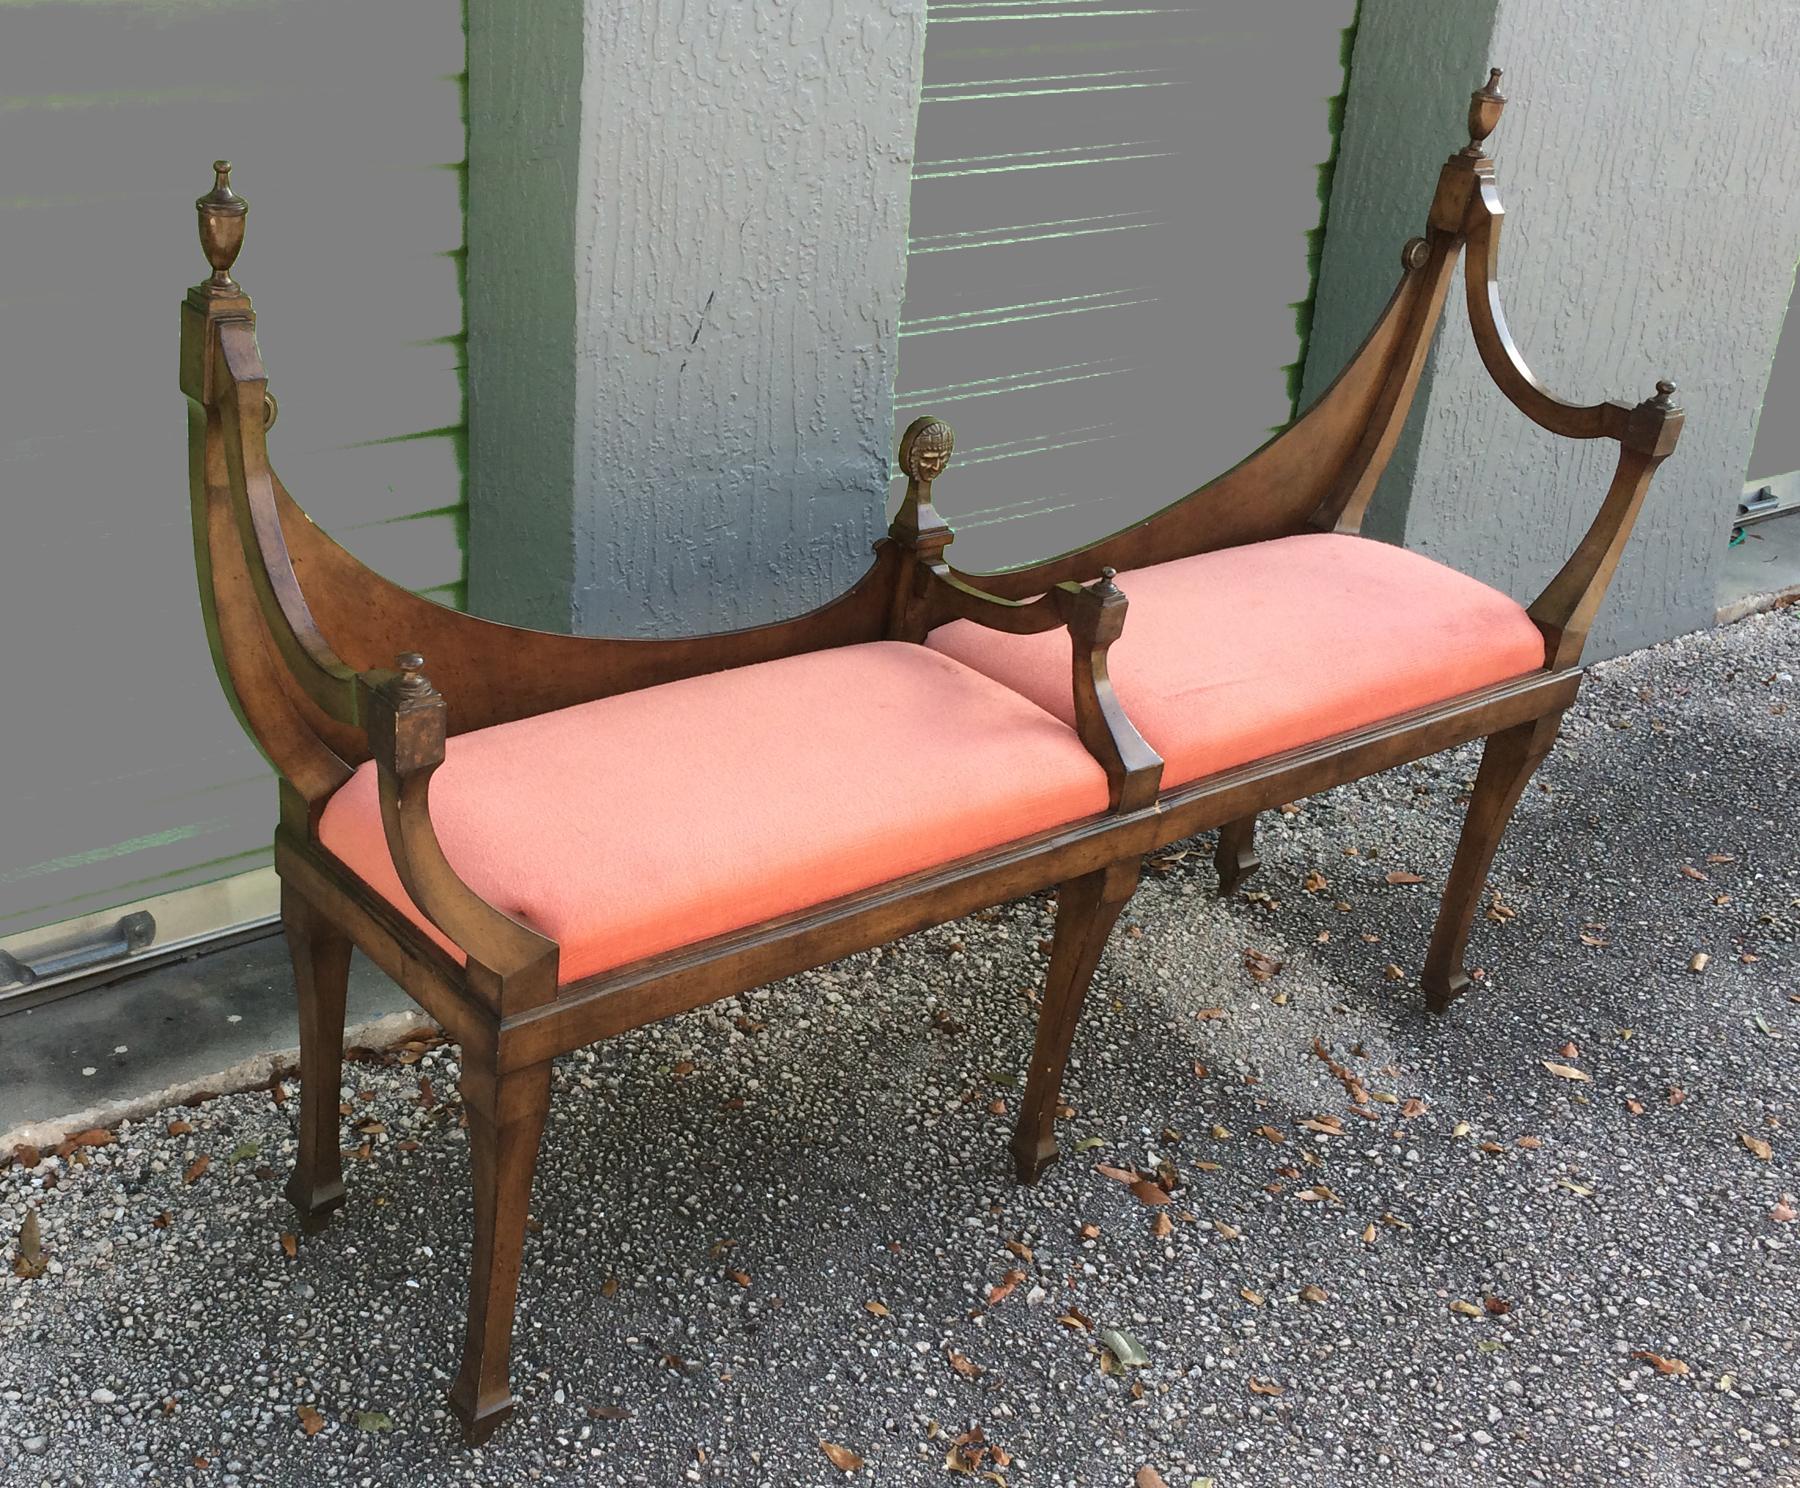 Intriguing fruit-wood bench in the neoclassic style. Inverted double arched back with finials. Scrolled arms, red fabric cushioned seat with tapered square legs. Has a small bronze plaque of a face on the middle back upright.